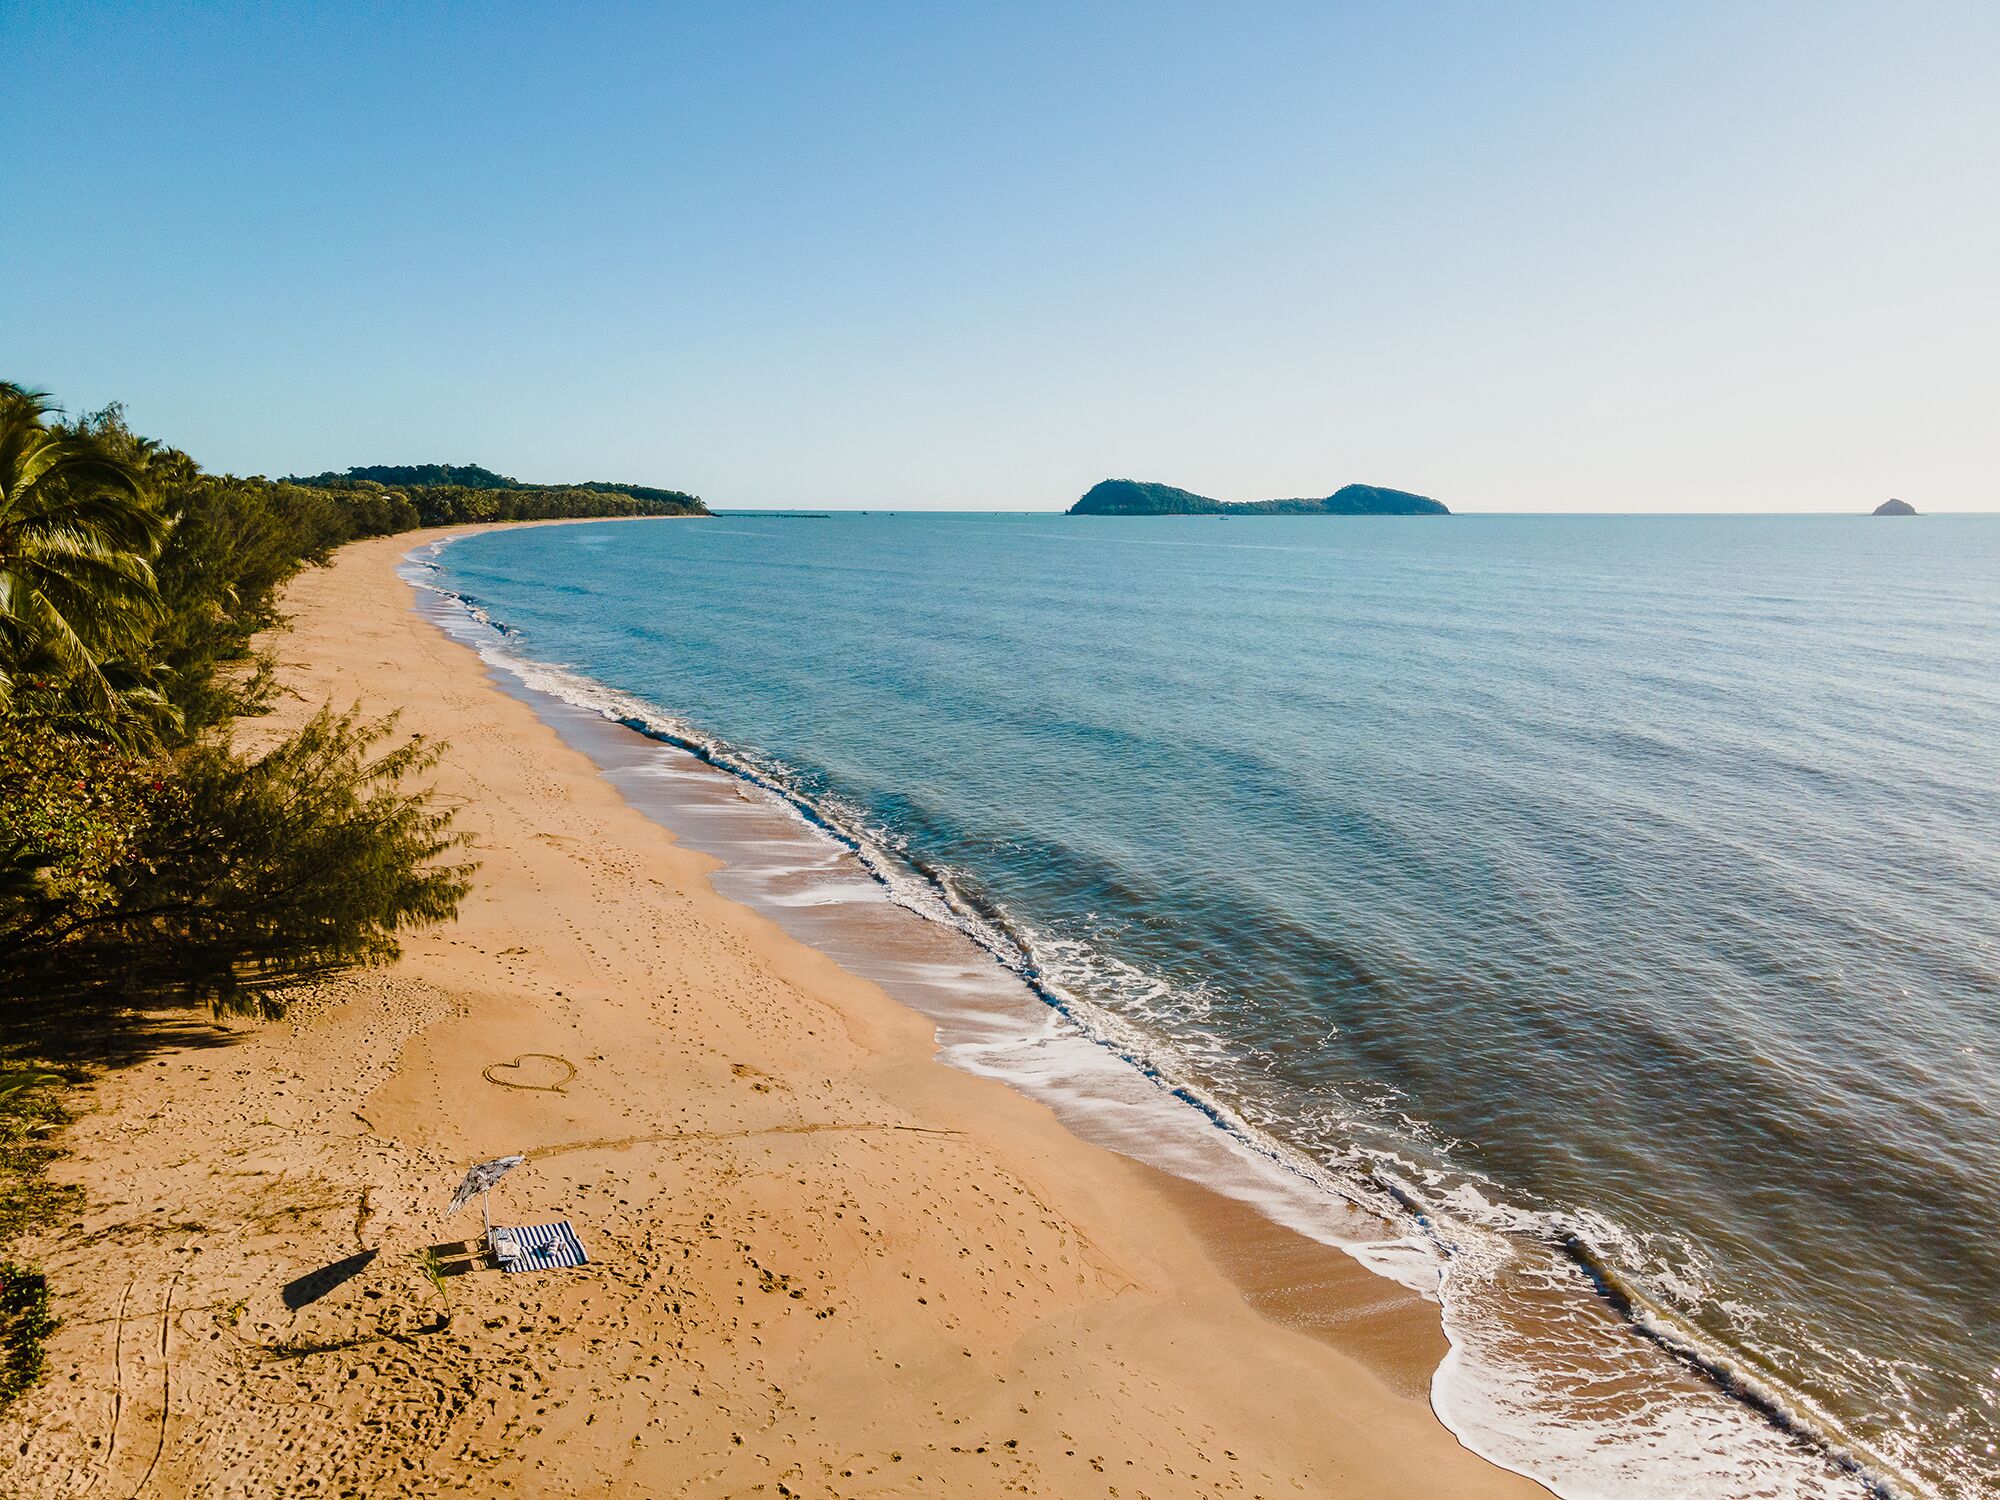 Experience the essence of the South Pacific in tropical Queensland, Australia.